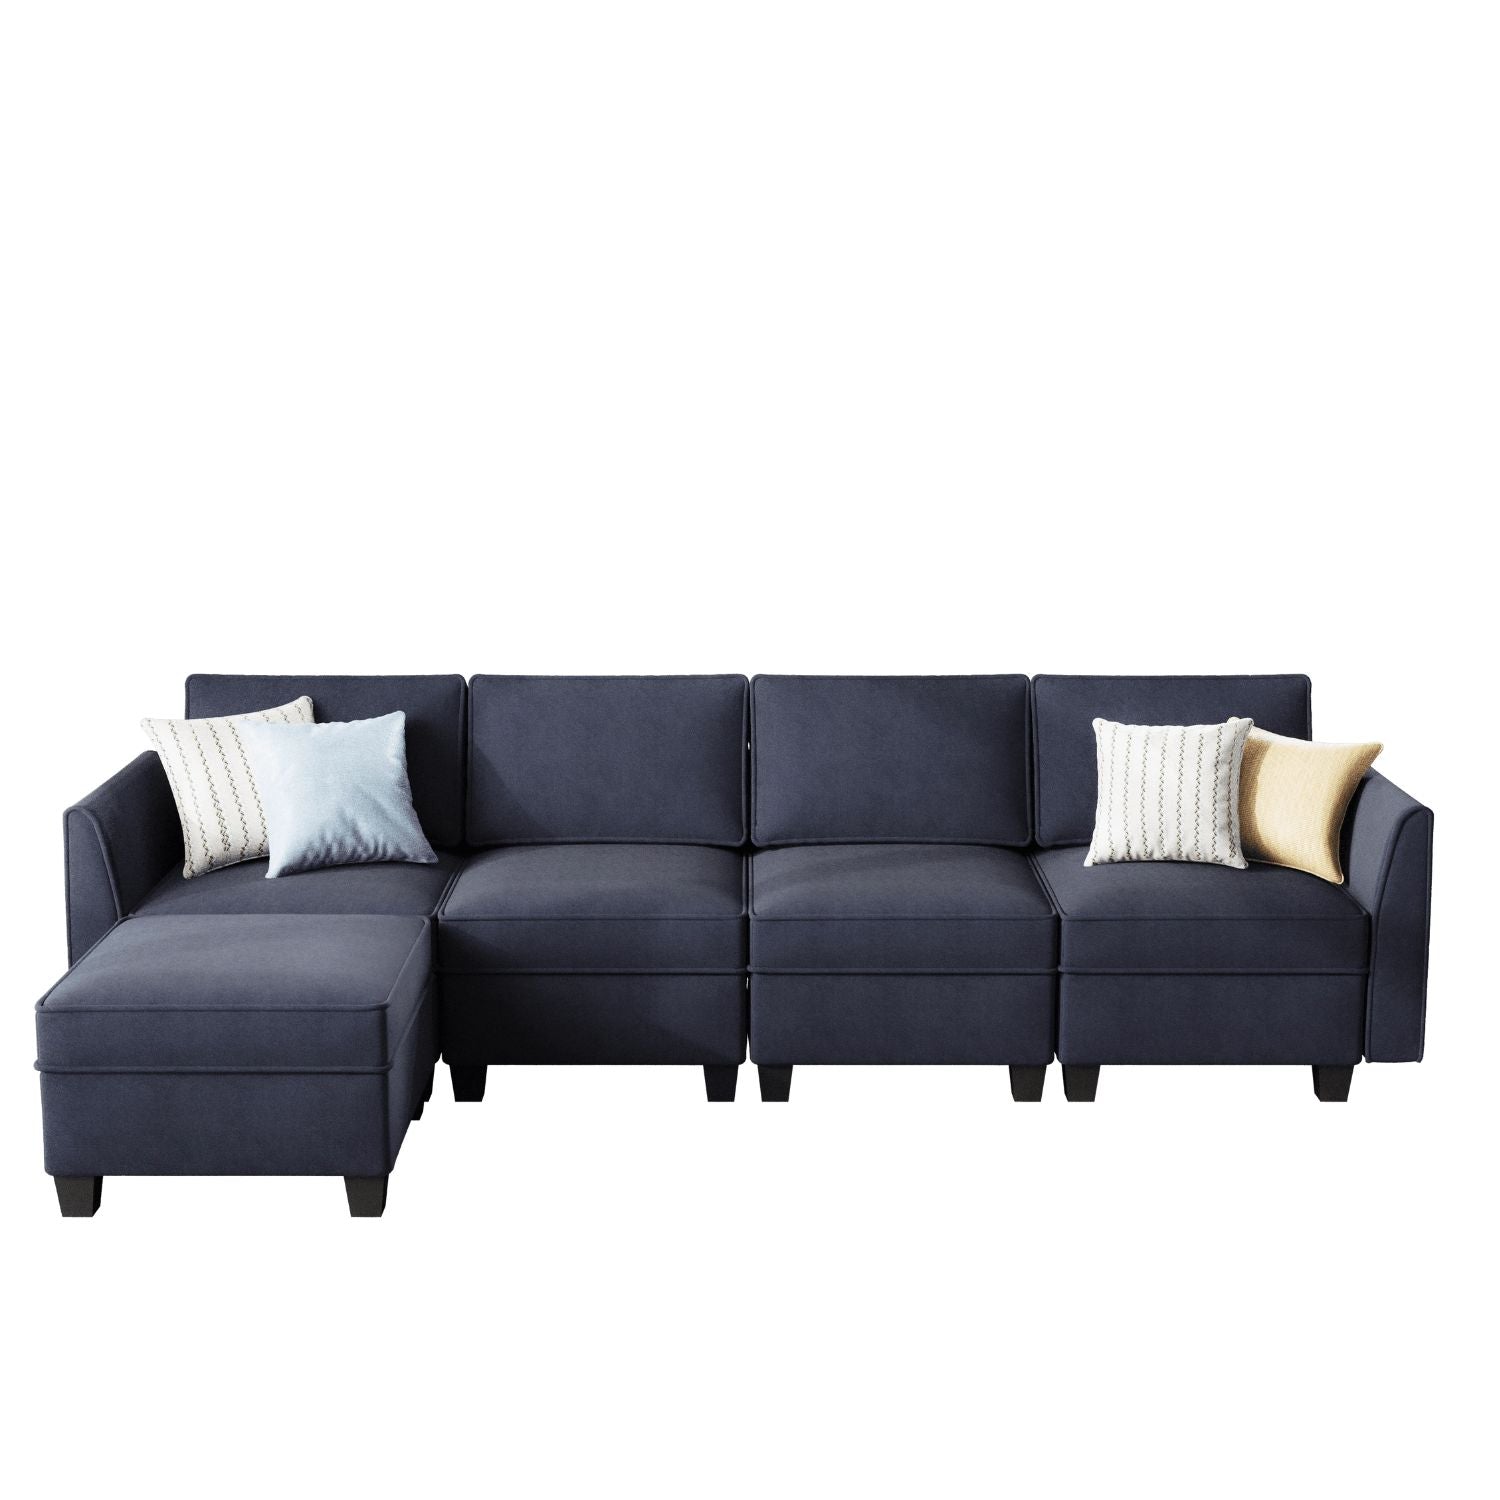 Caleb Modular Velvet Sectional Sofa Couch with Storage and Chaise